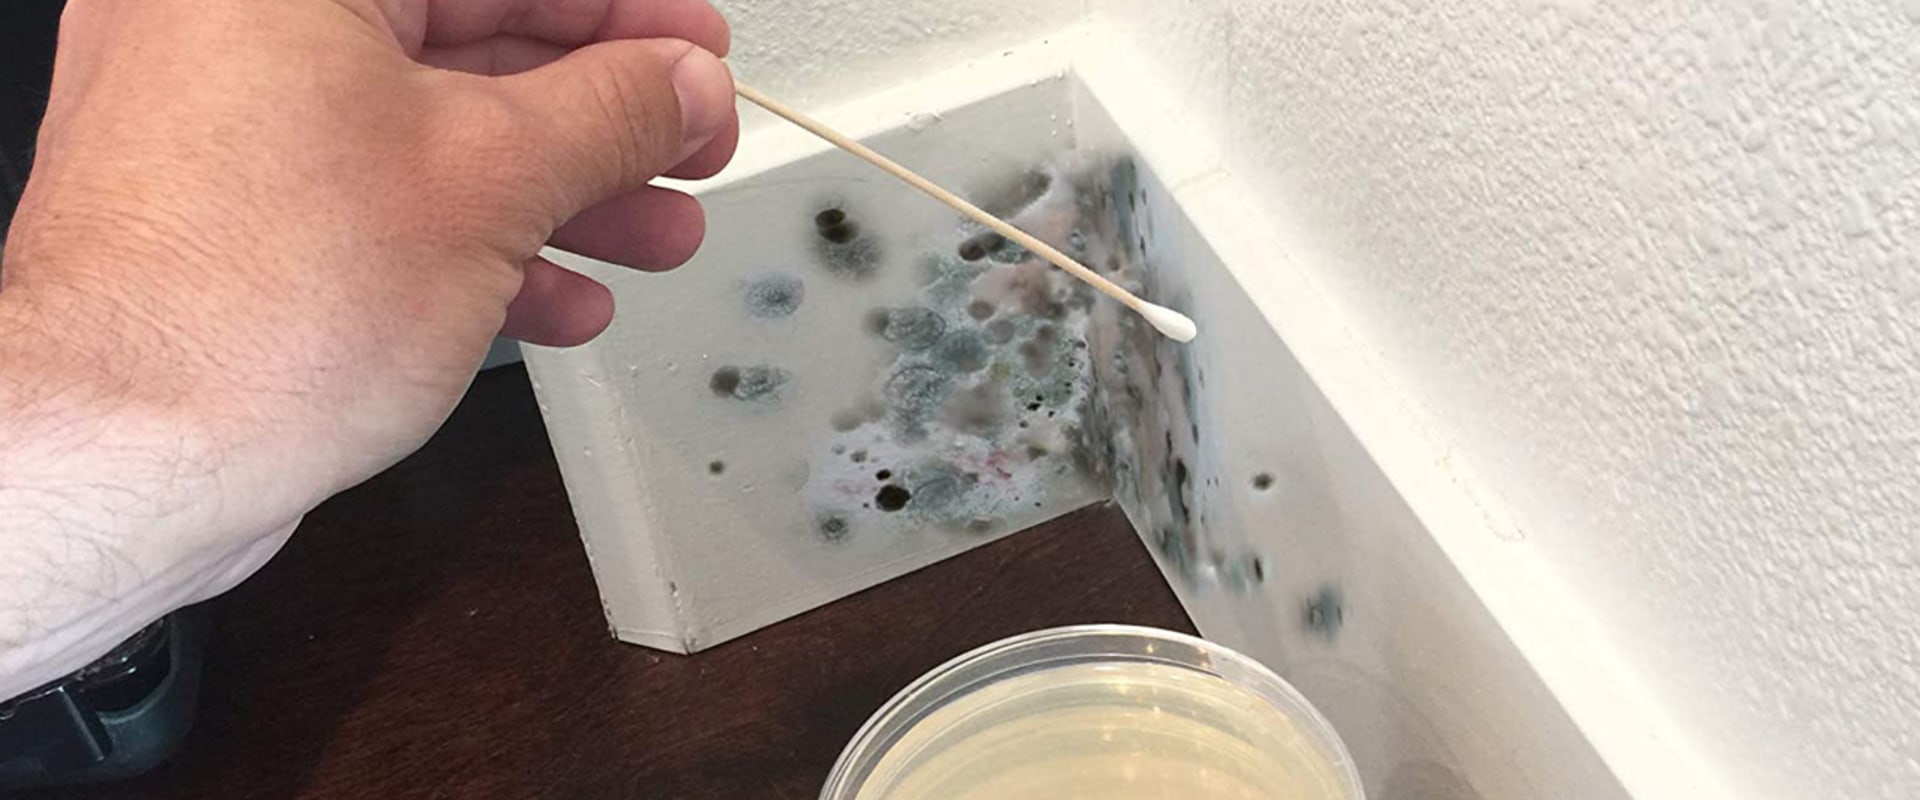 Where to check for mold in house?